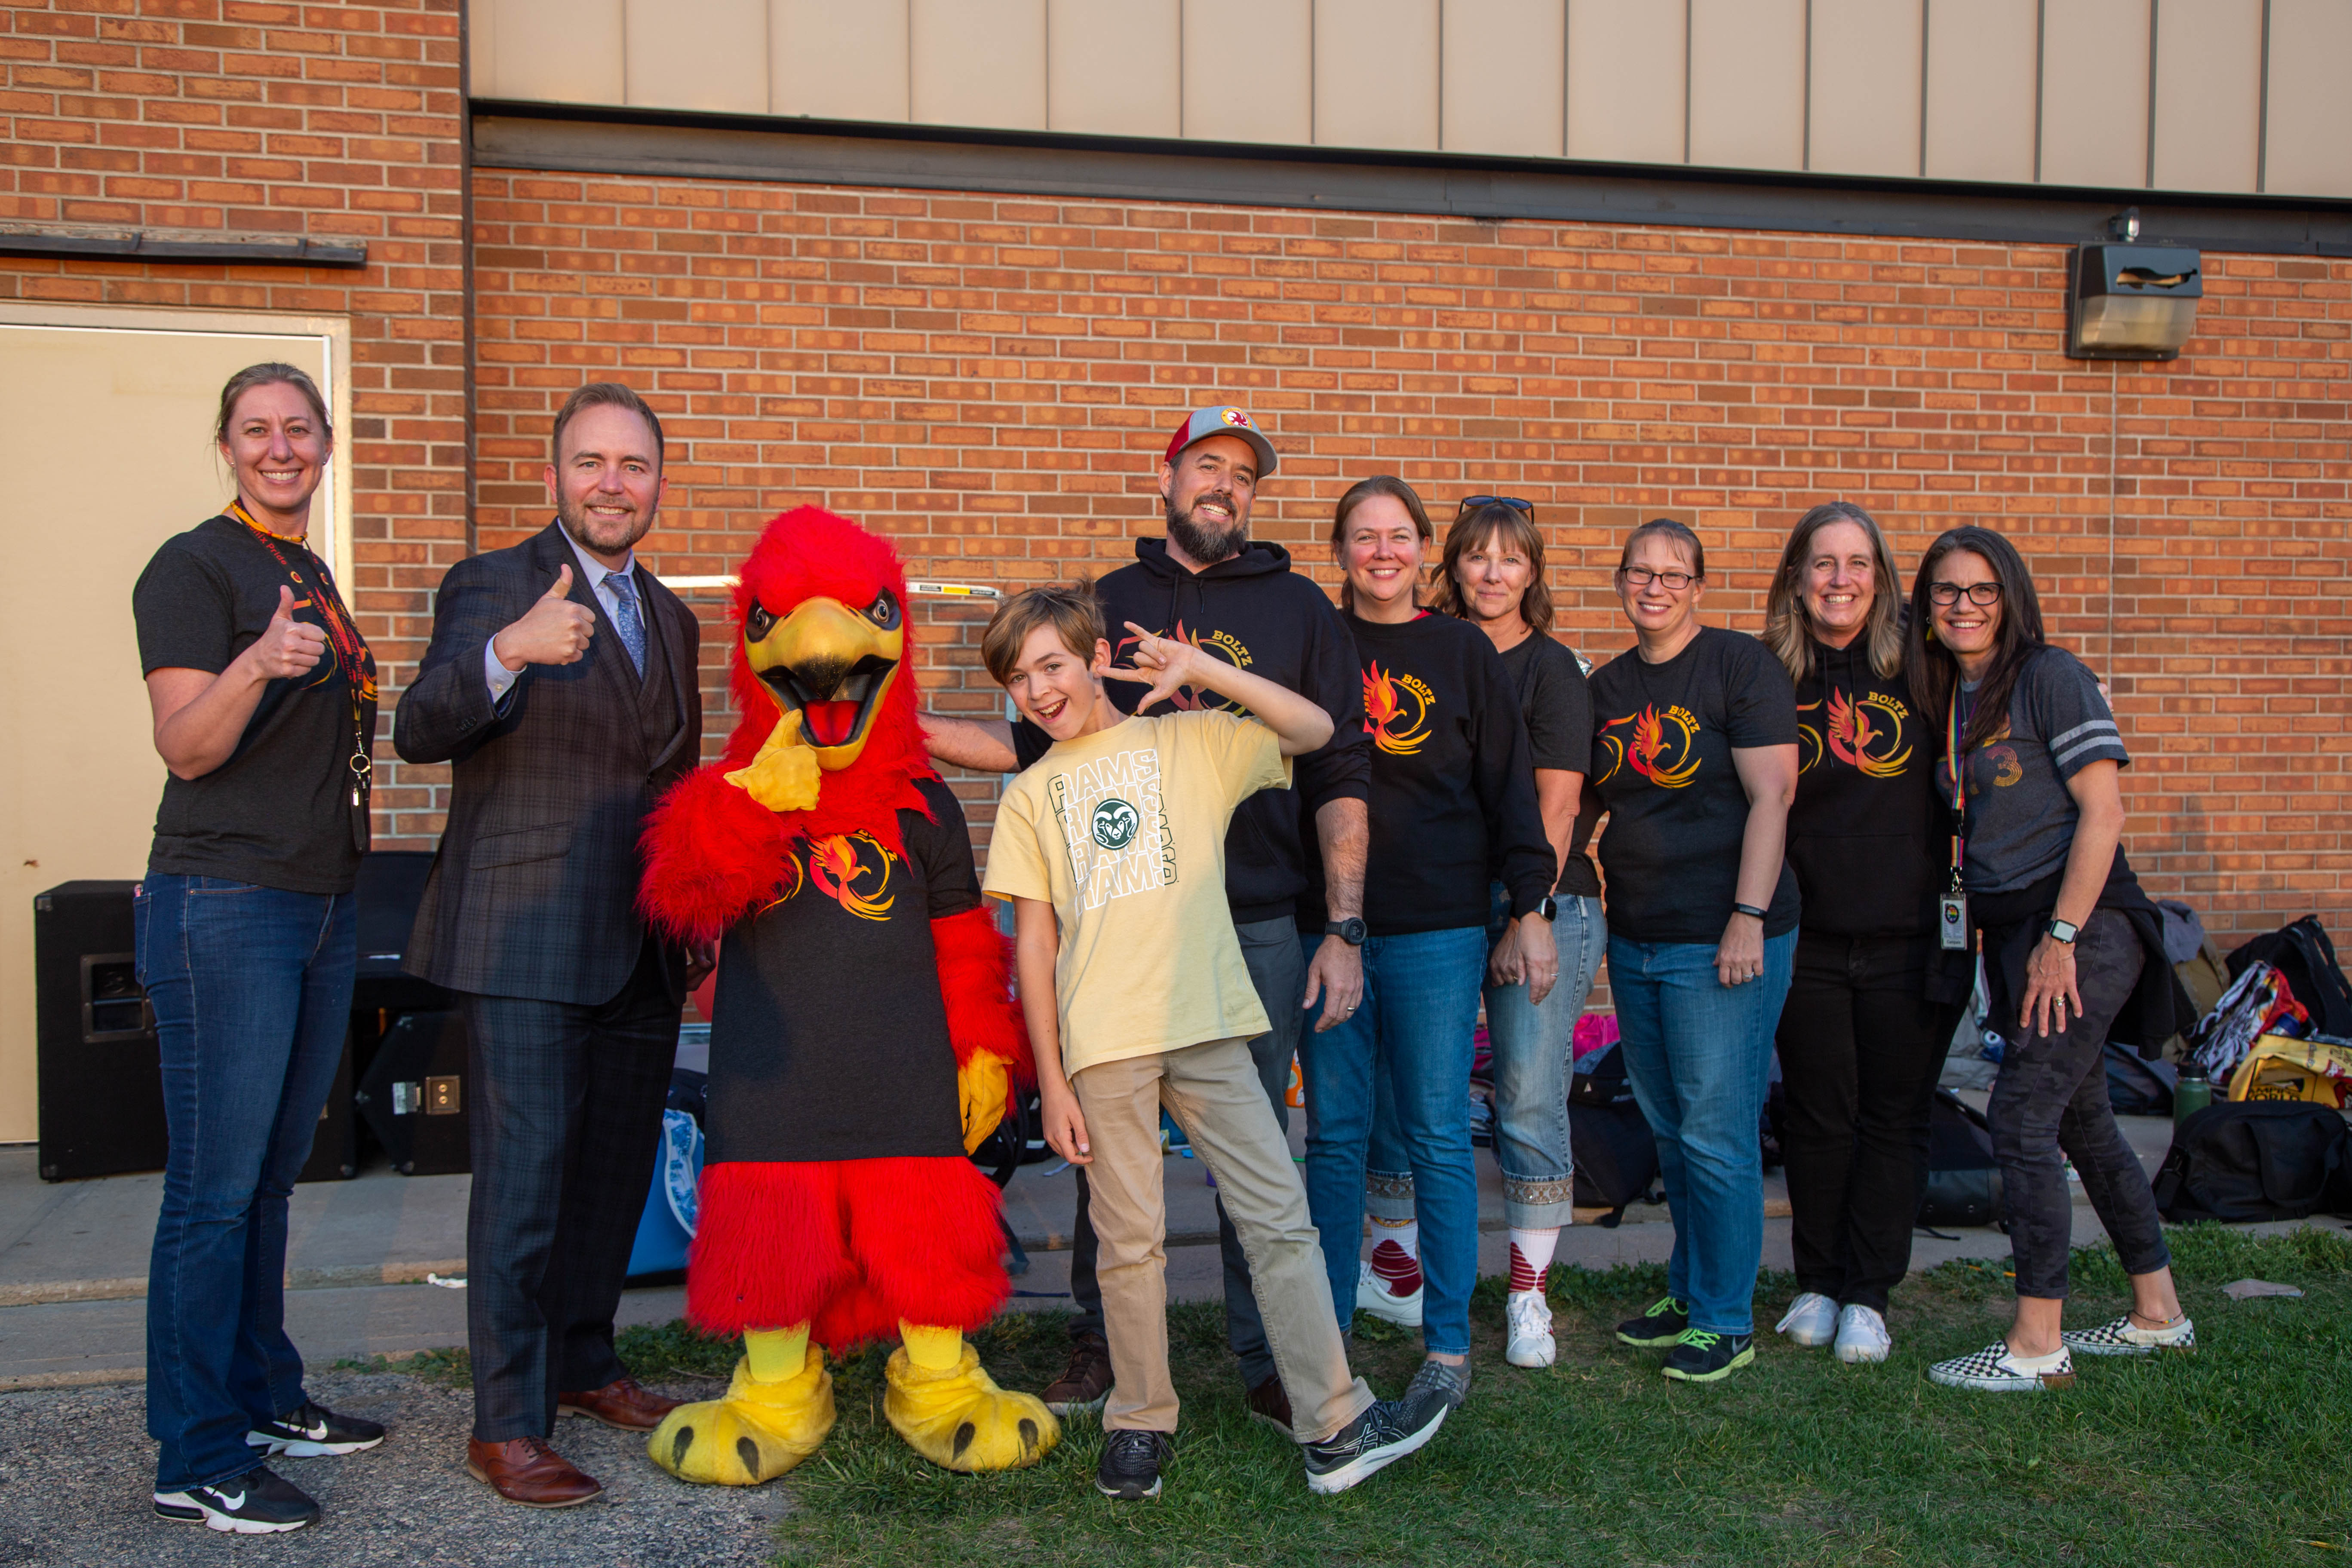 Superintendent Kingsley stands with the Boltz mascot, a Phoenix, and Boltz staff members.